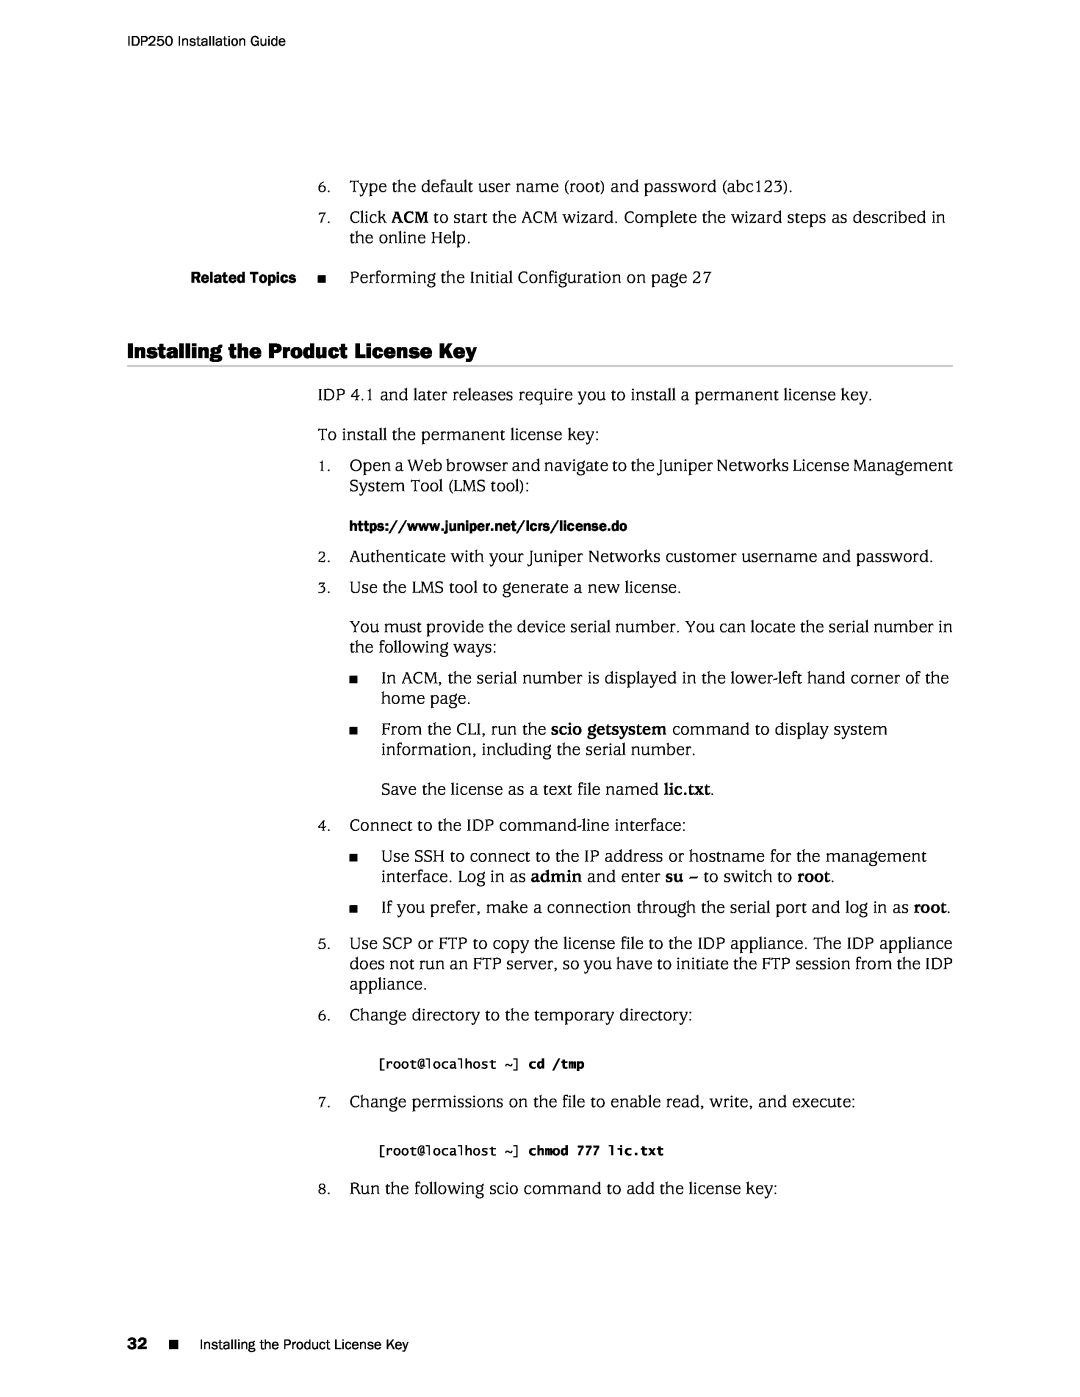 Juniper Networks IDP250 manual Installing the Product License Key 